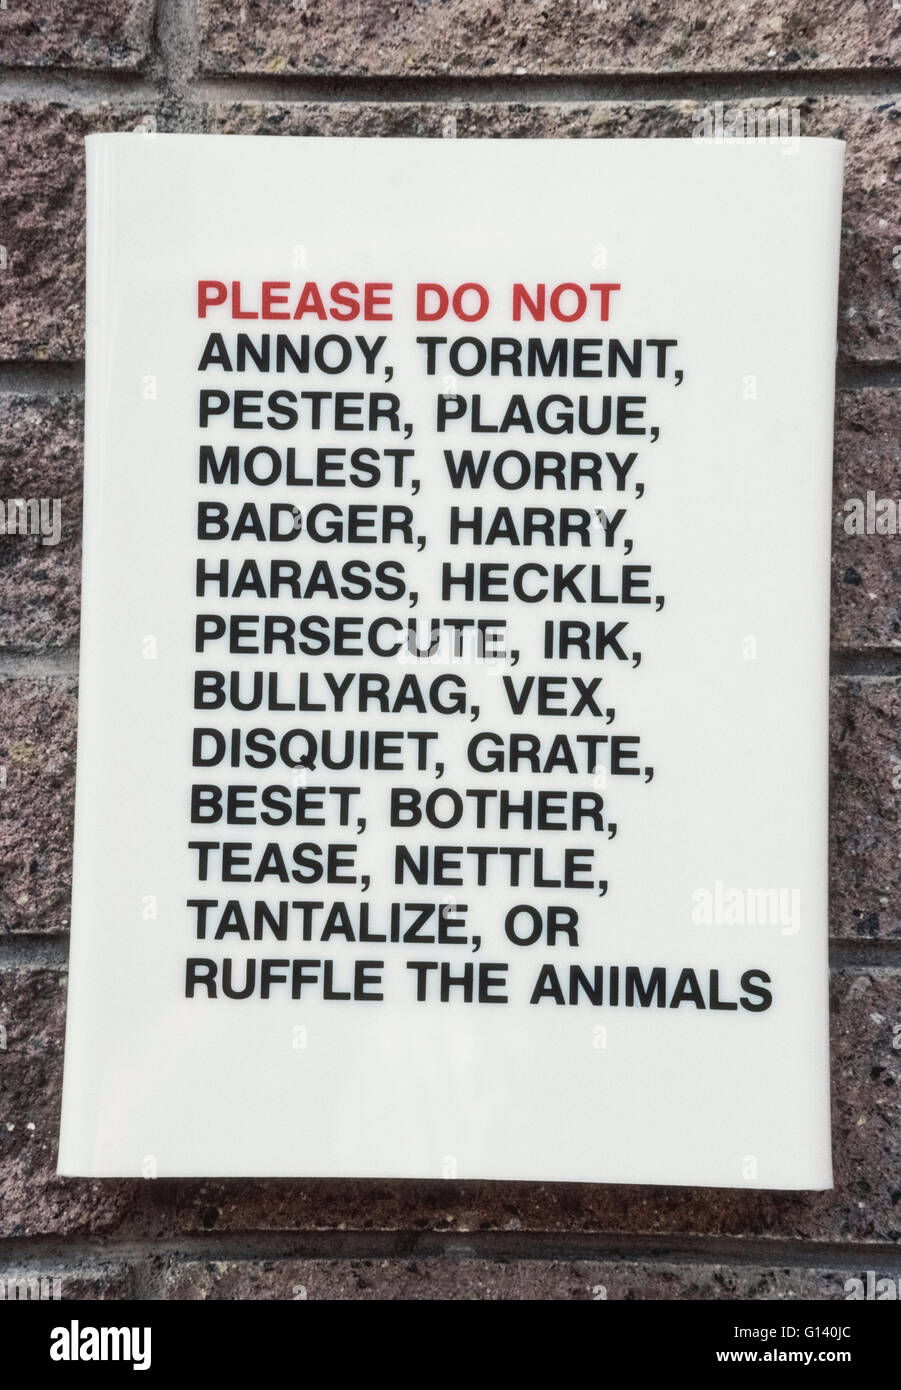 A simple but intriguing sign with an extensive list of words asks visitors not to mistreat the animals at the world-famous San Diego Zoo in San Diego, California, USA. It politely requests zoogoers not to annoy, torment, pester, plague, molest, worry, badger, harry, harass, heckle, persecute, irk, bullyrag, vex, disquiet, grate, best, bother, tease, nettle, tantalize or ruffle the more than 3,500 rare and endangered animals living there. Stock Photo